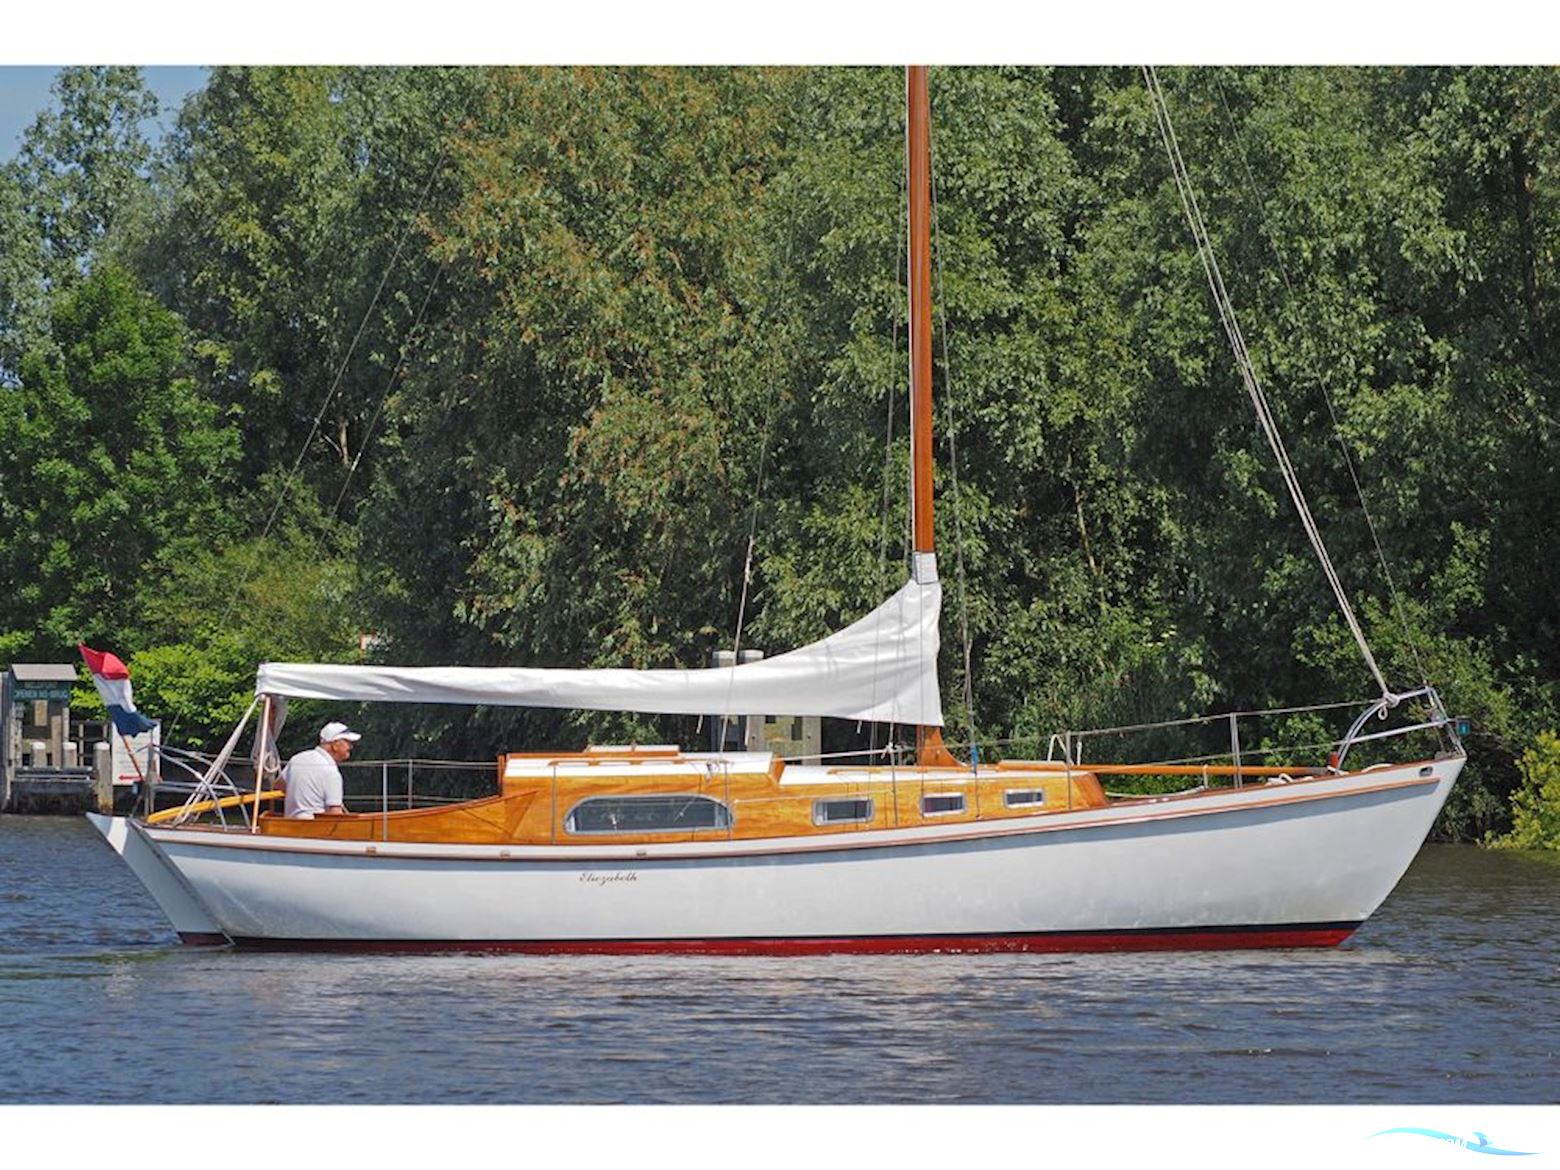 Valk 960 One Off Motor boat 1962, with Bukh engine, The Netherlands